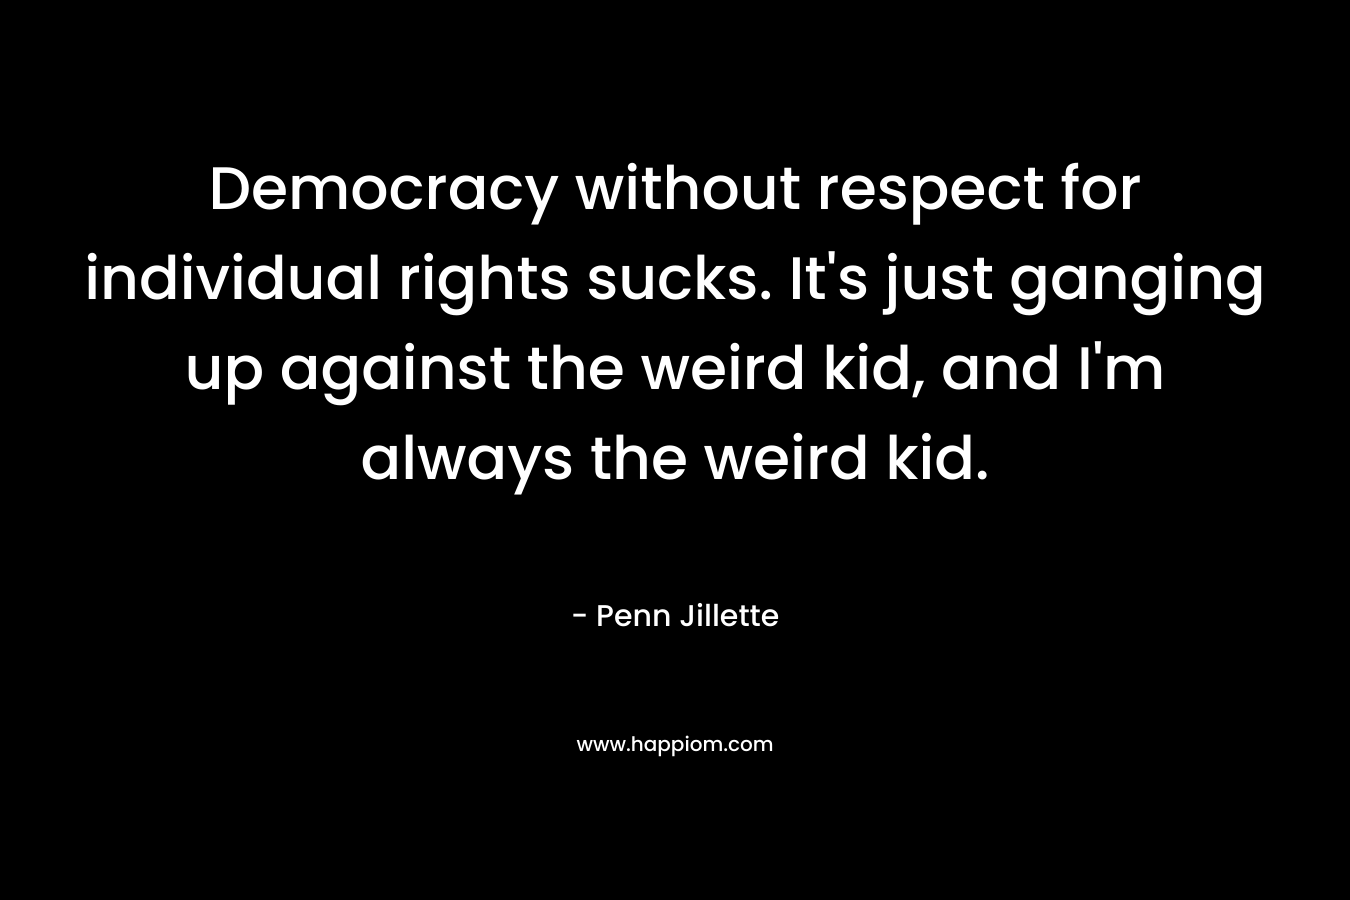 Democracy without respect for individual rights sucks. It's just ganging up against the weird kid, and I'm always the weird kid.